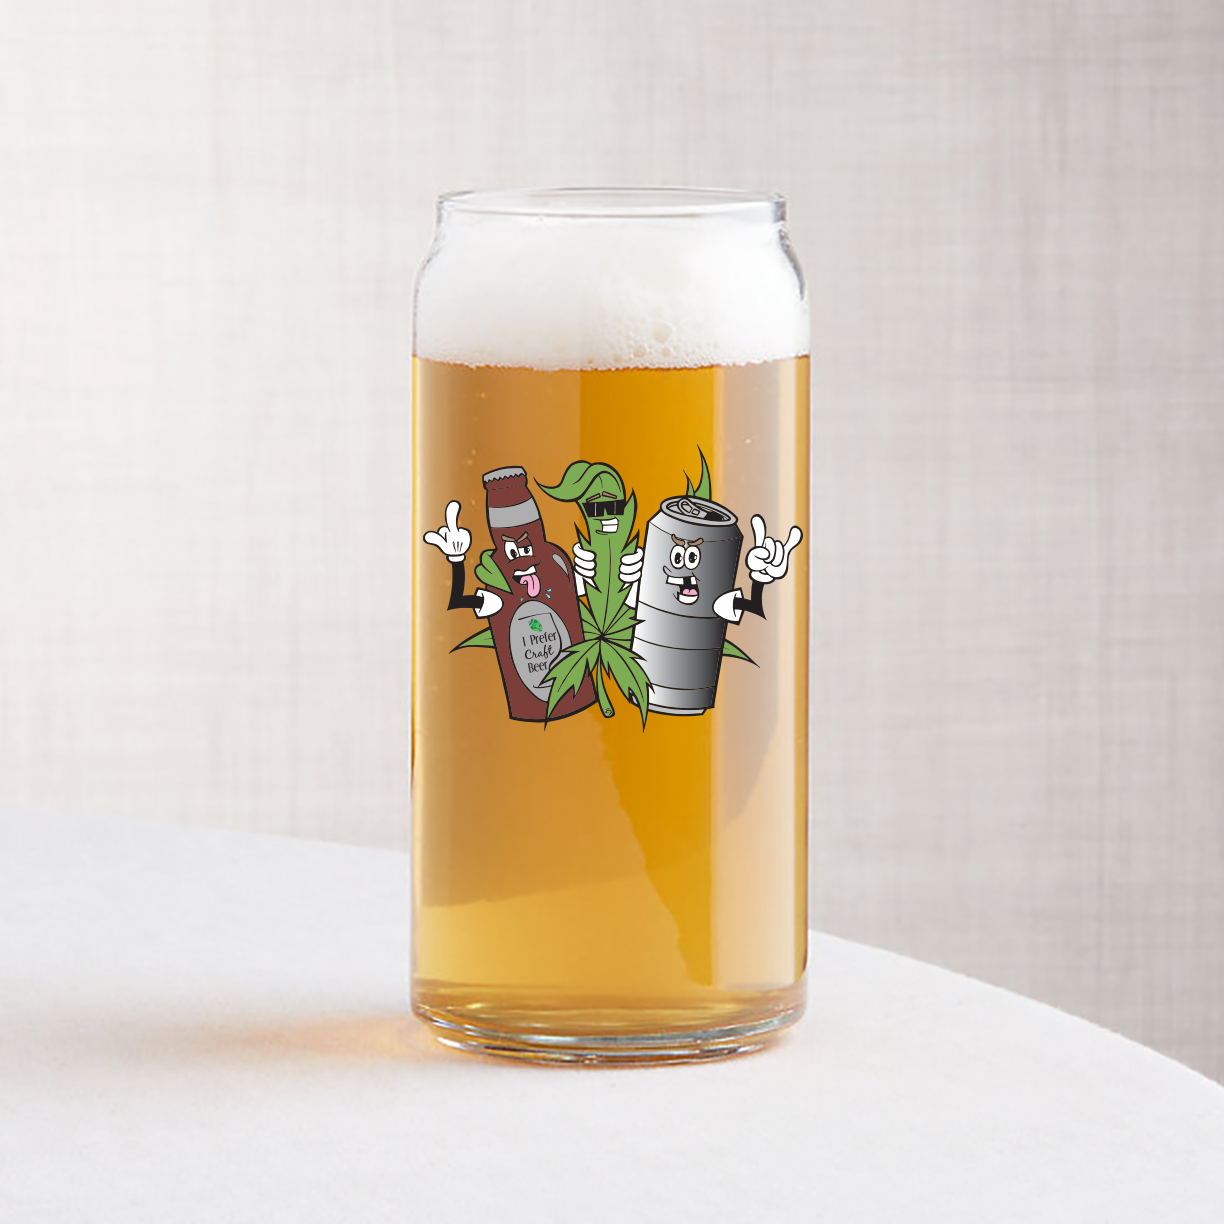 Best Craft Beer Glasses, Best Cannabis Culture Glasses, and Best Weed Beer Glasses